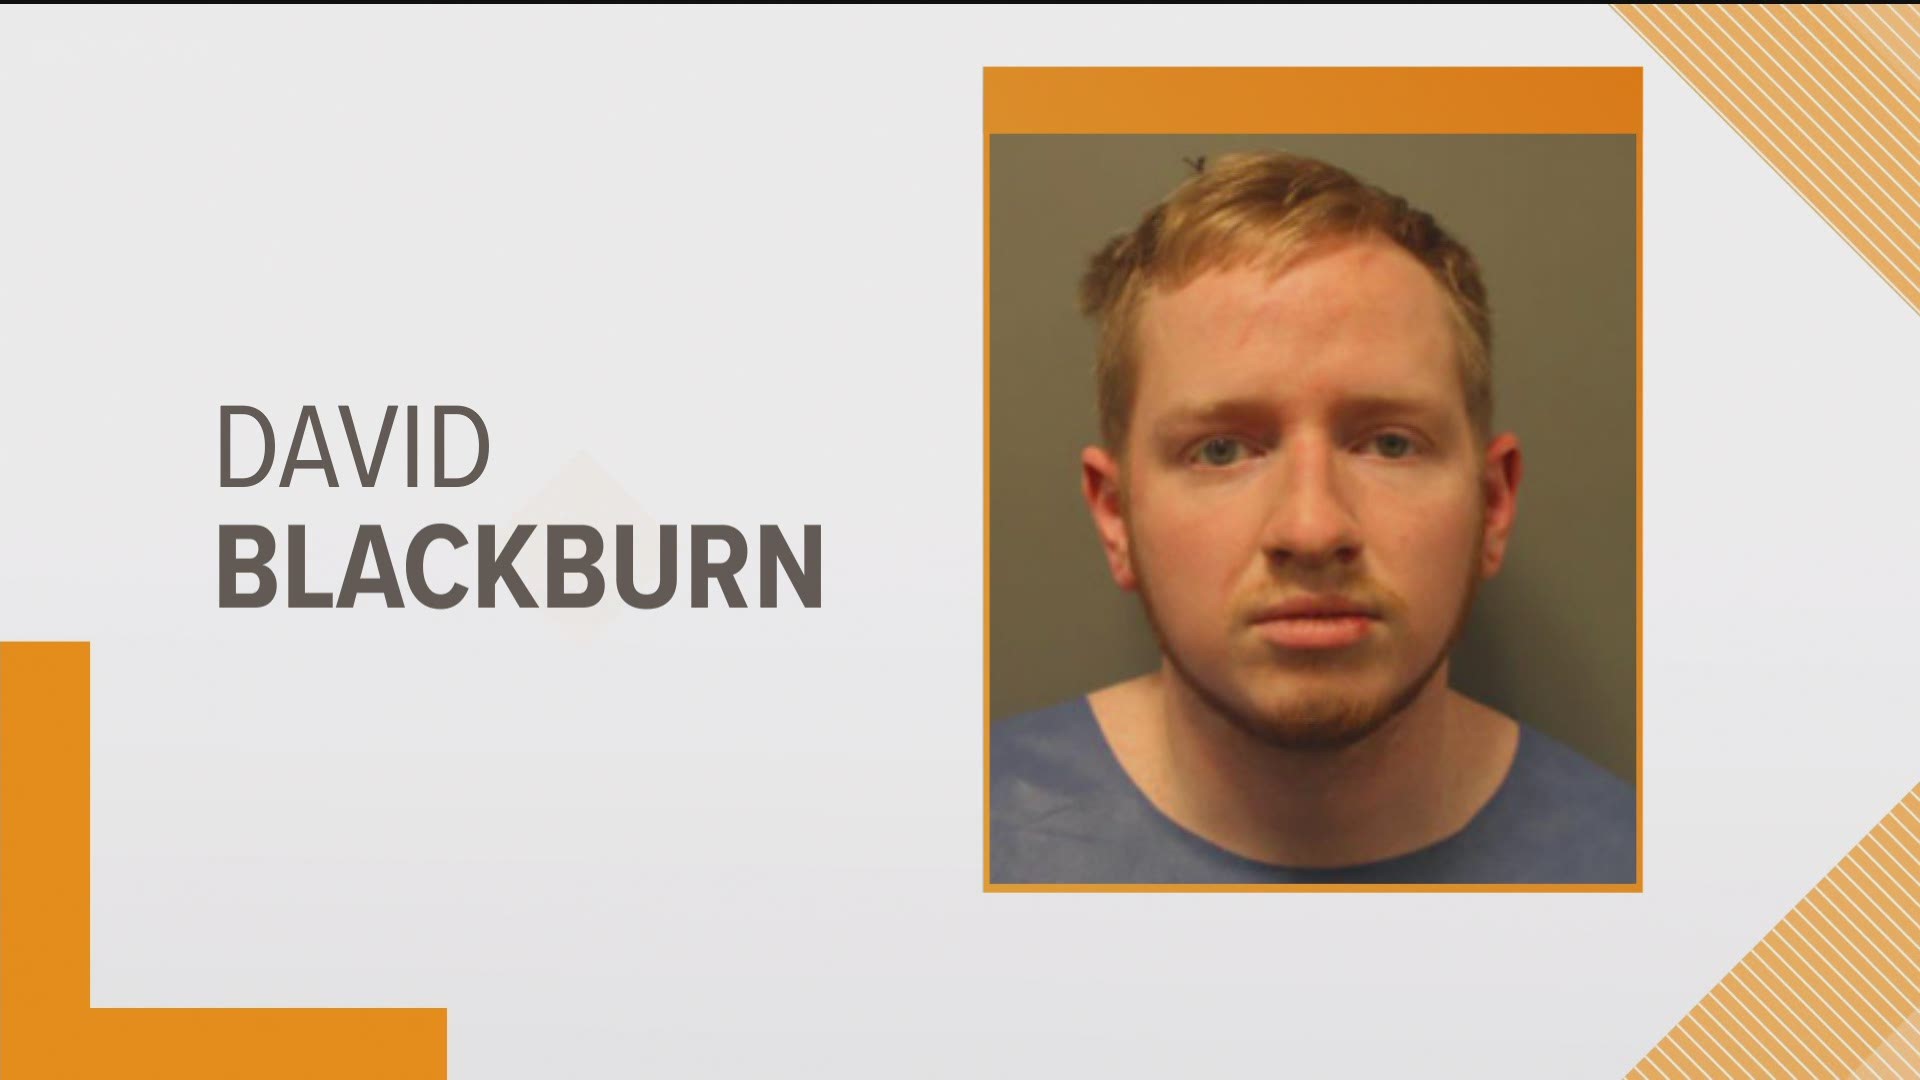 David Blackburn was arrested and taken to the Central Processing Unit where he has been charged with first-degree murder, police say.